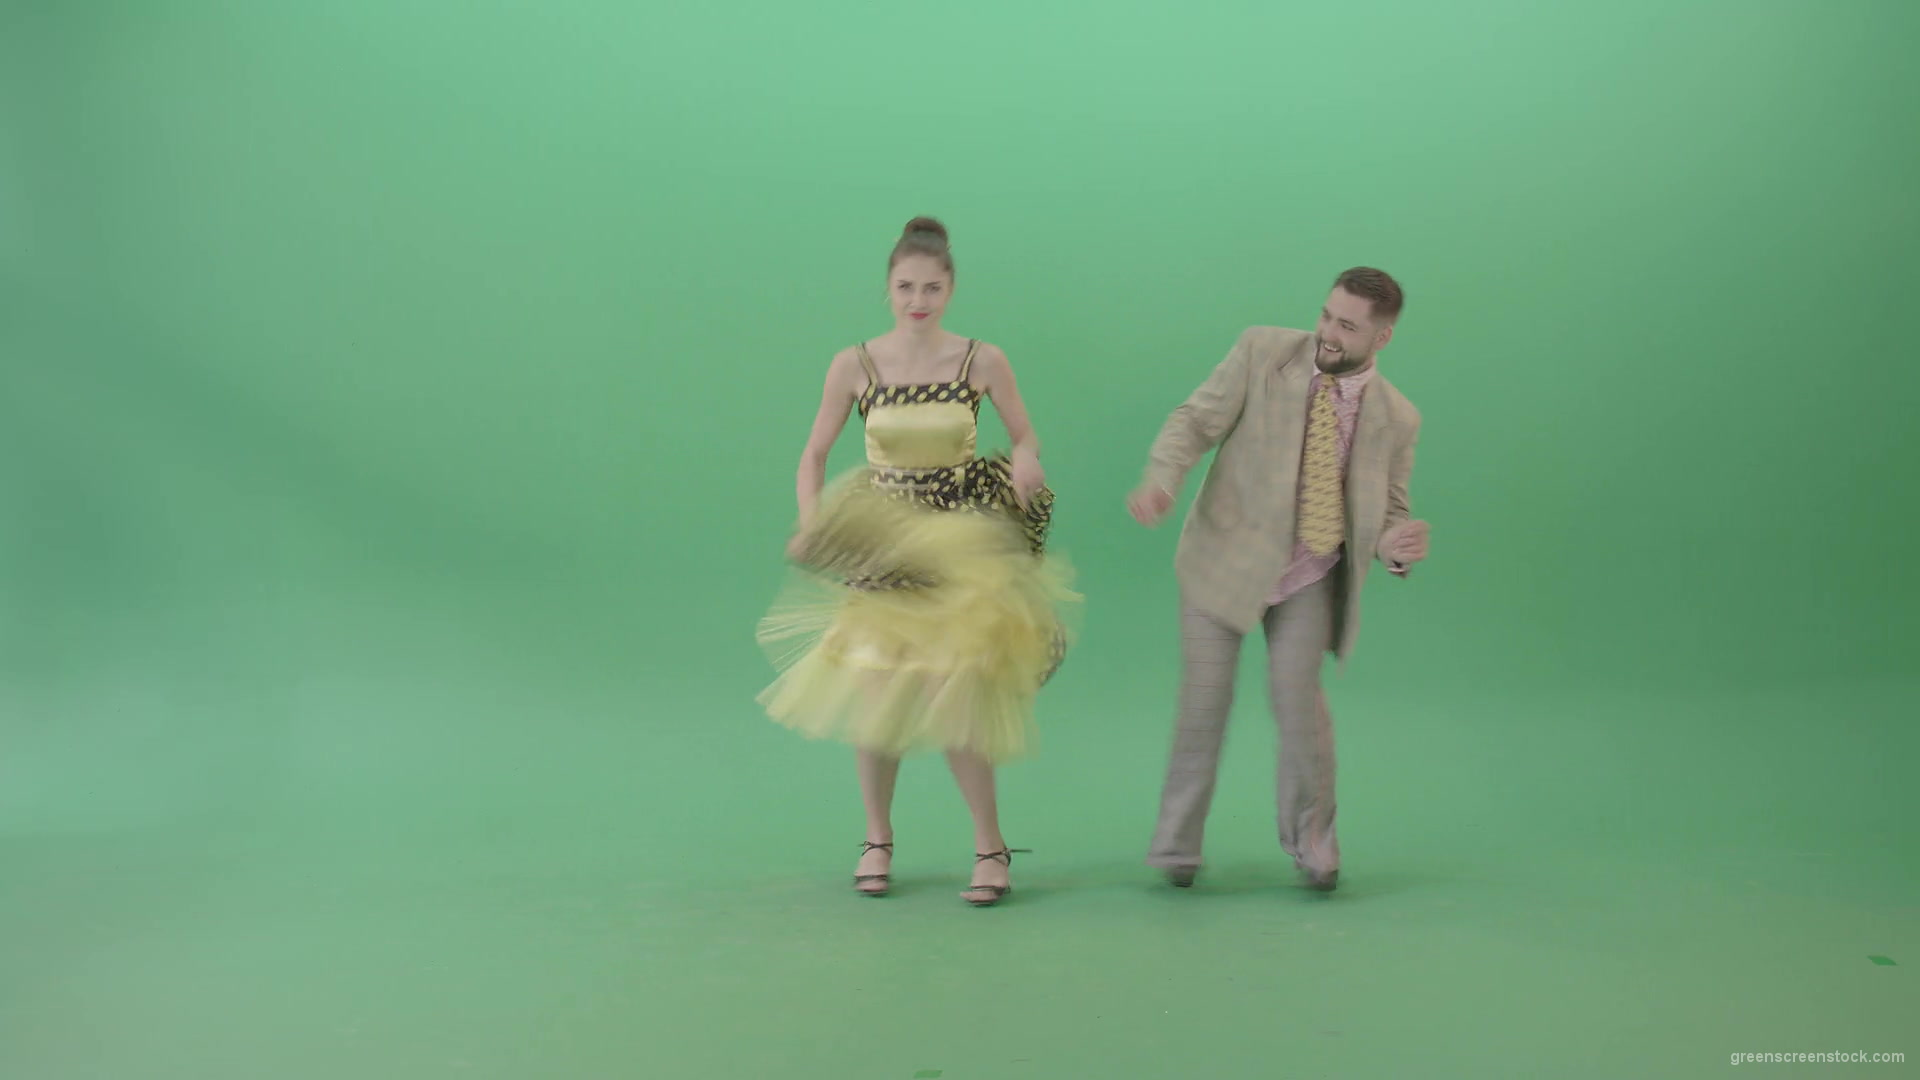 Happy-Man-and-woman-dancing-Boogie-woogie-moves-and-rock-and-roll-over-Green-Screen-4K-Video-Footage-1920_004 Green Screen Stock